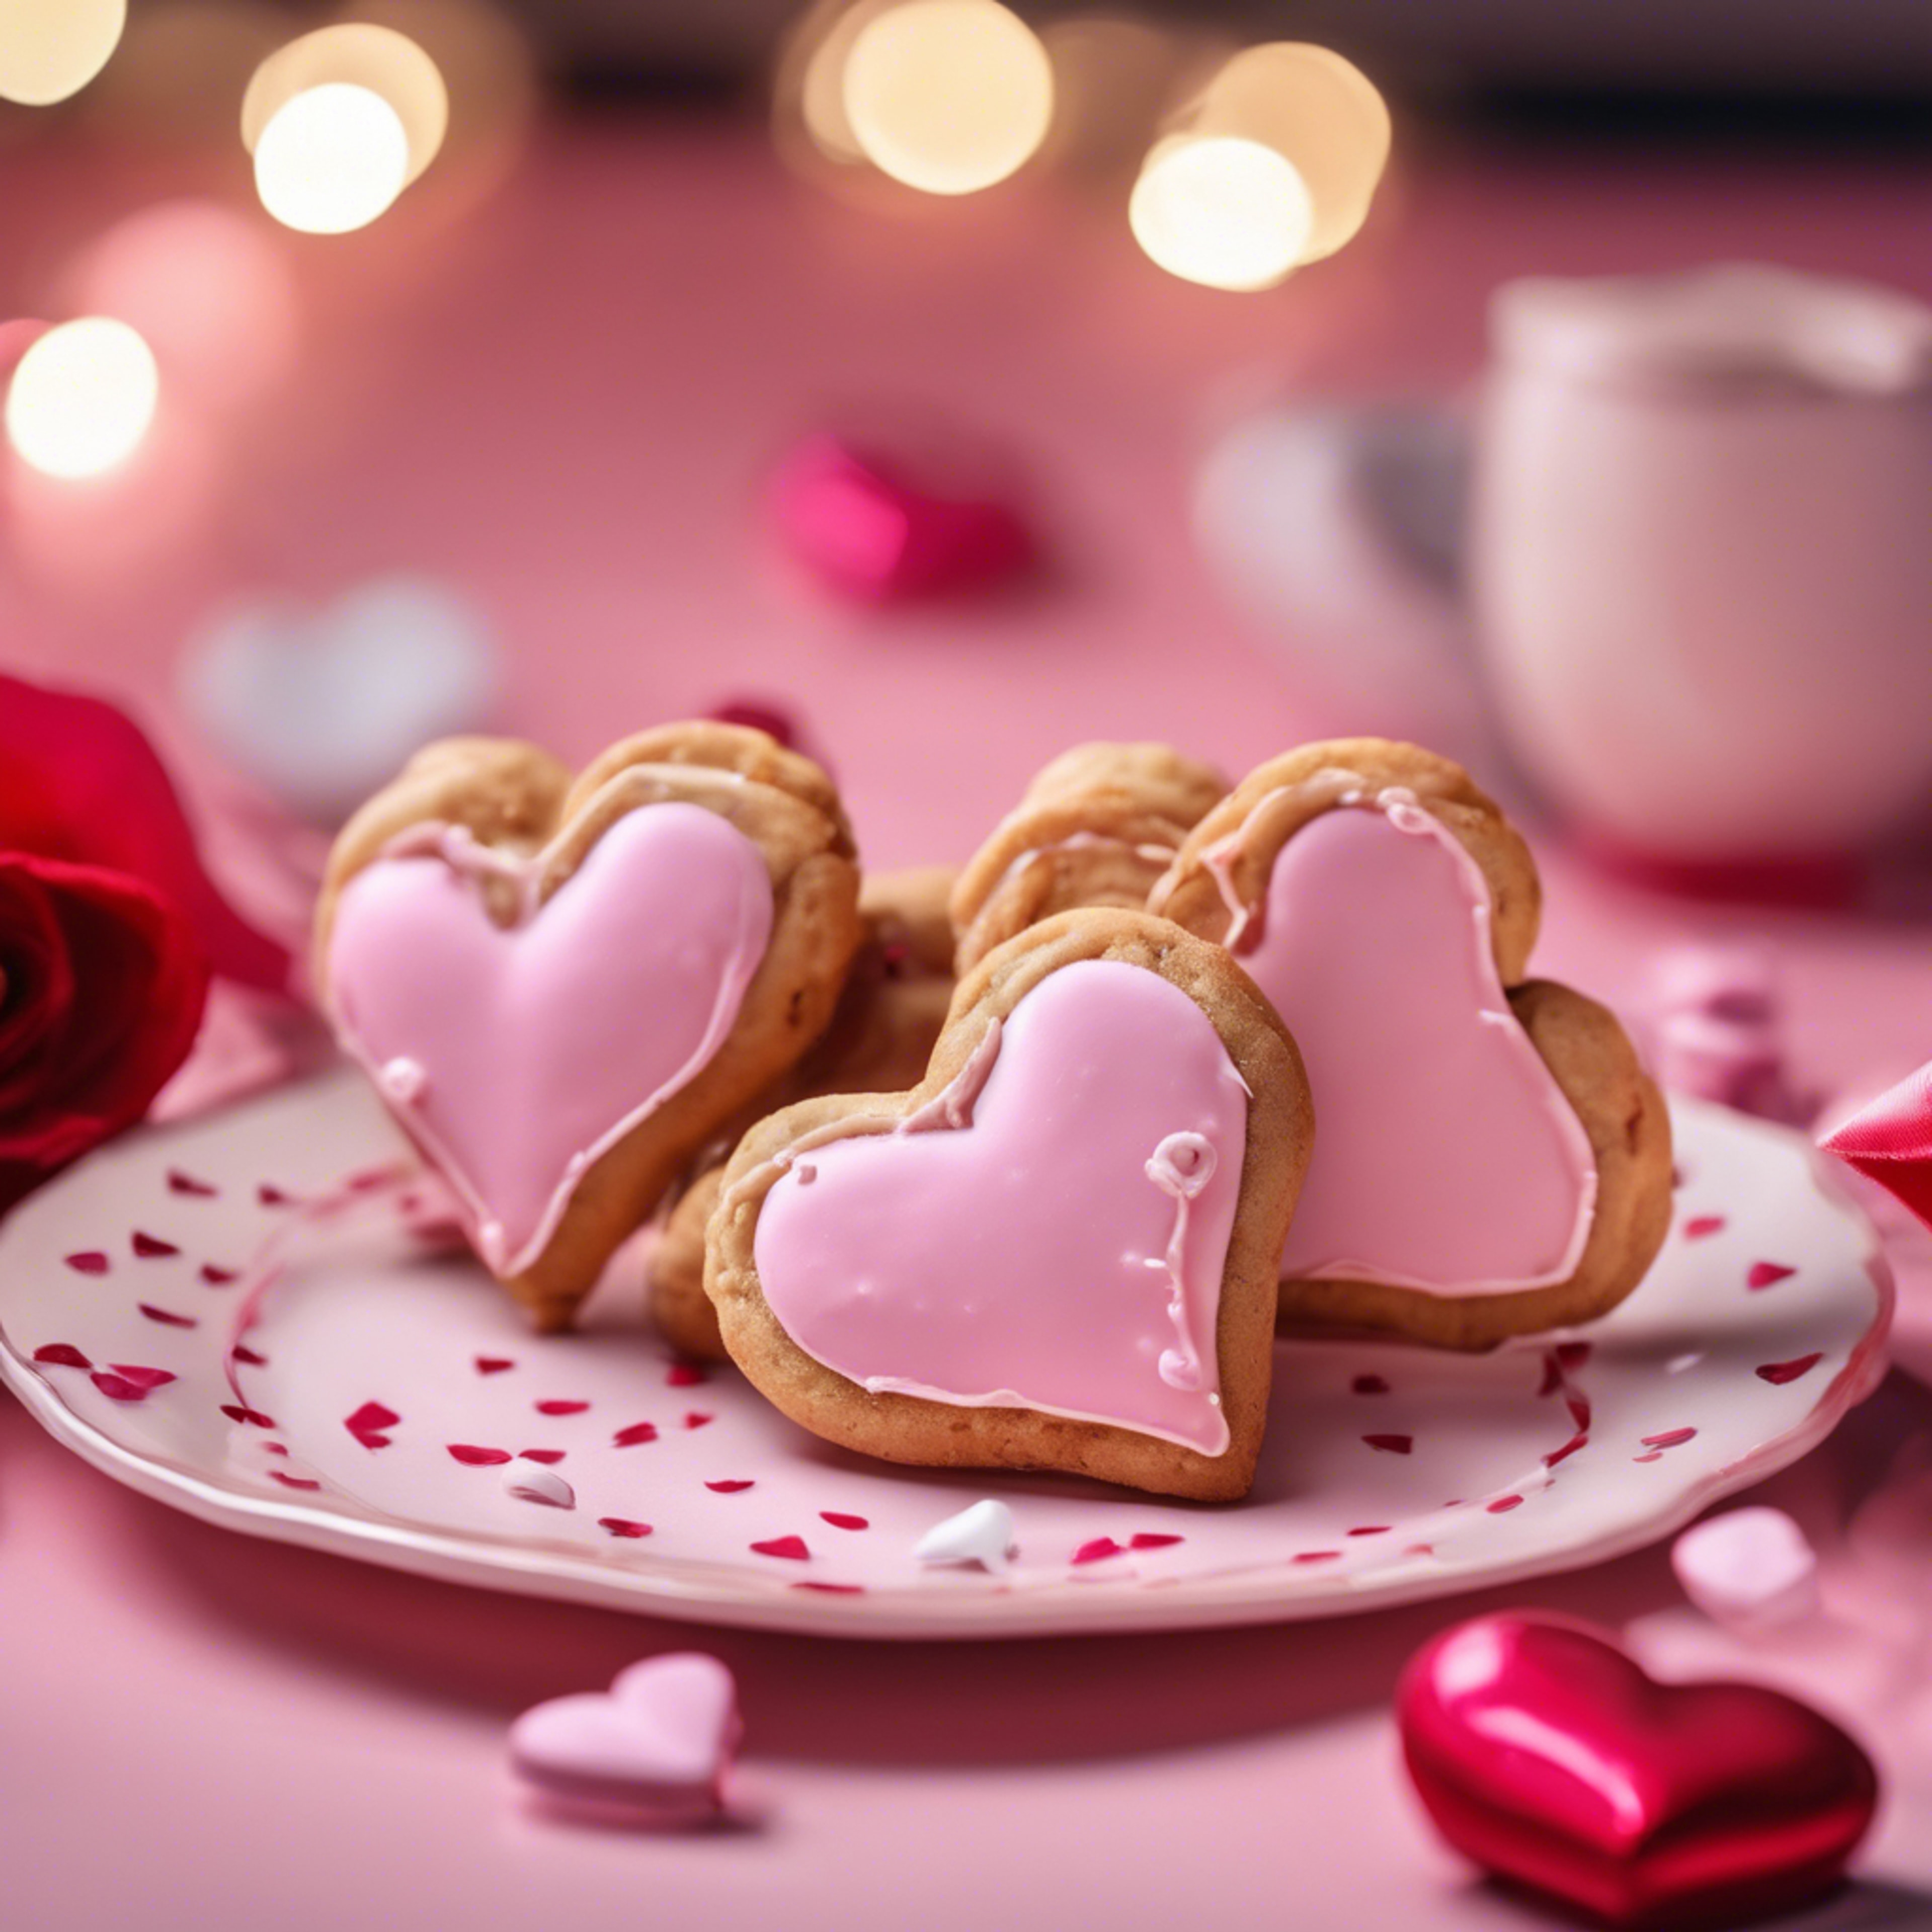 A pair of heart-shaped frosted cookies on a vibrant Valentine's day setting. 牆紙[699c1bd667c44183af85]